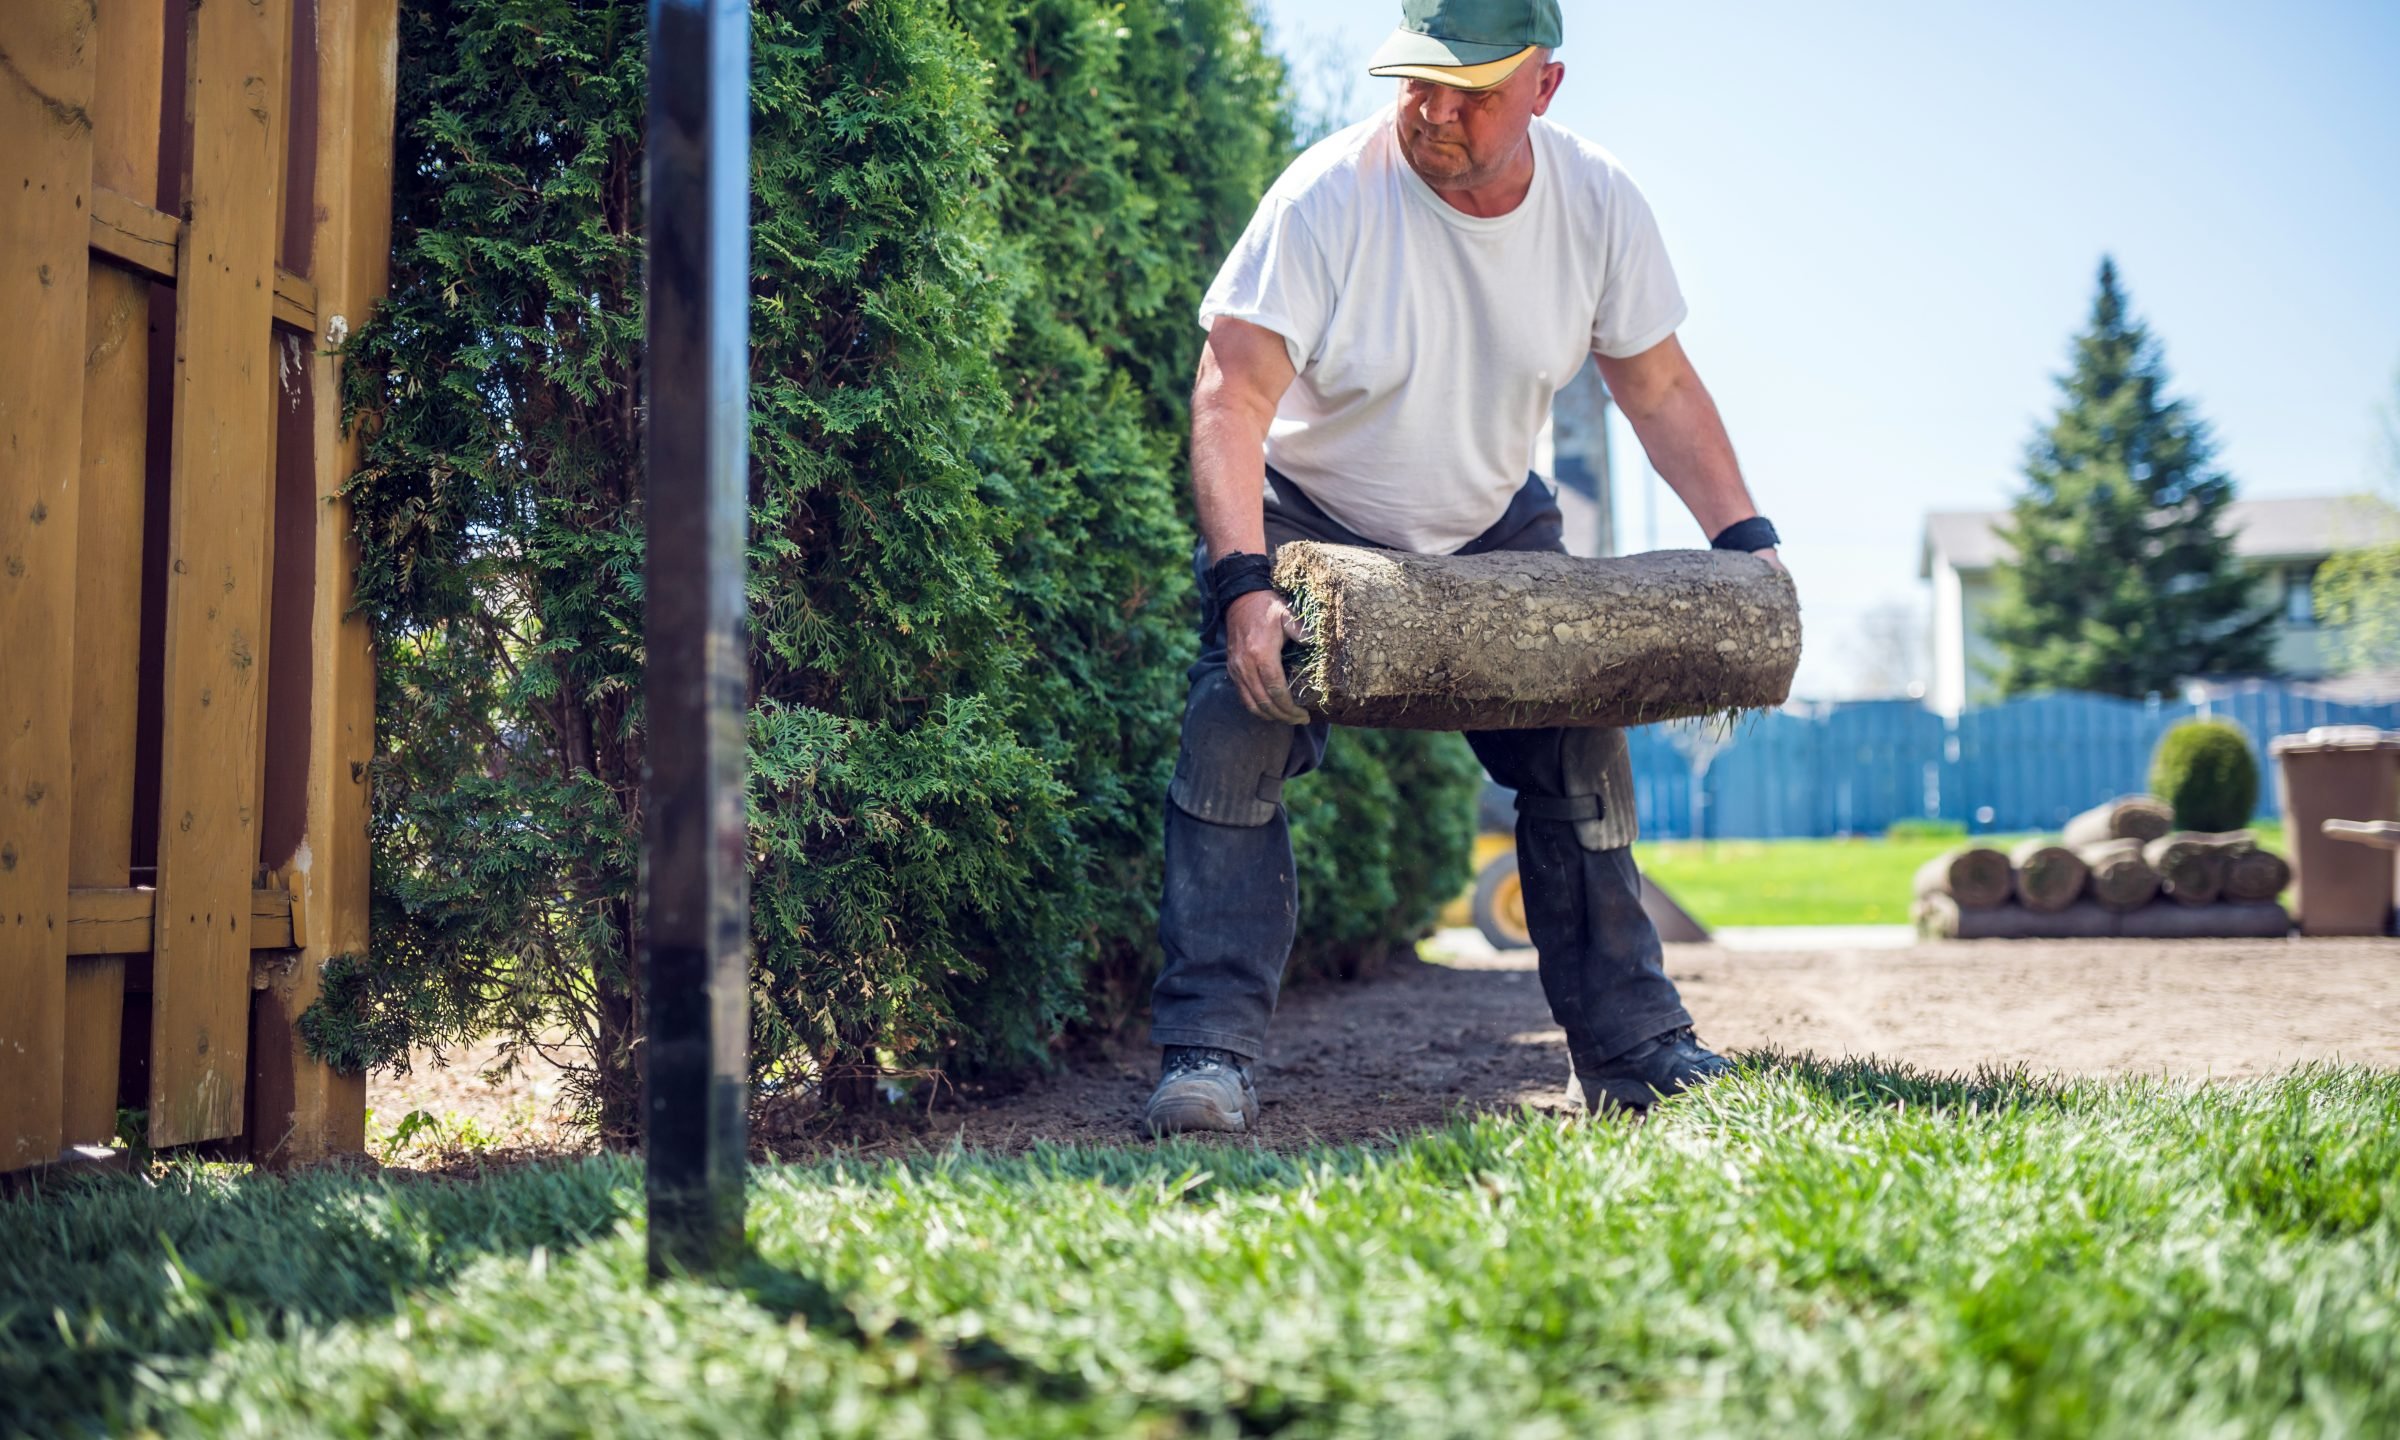 A Landscaping Or Lawn Care Business, How Much Does Insurance Cost For A Landscaping Company